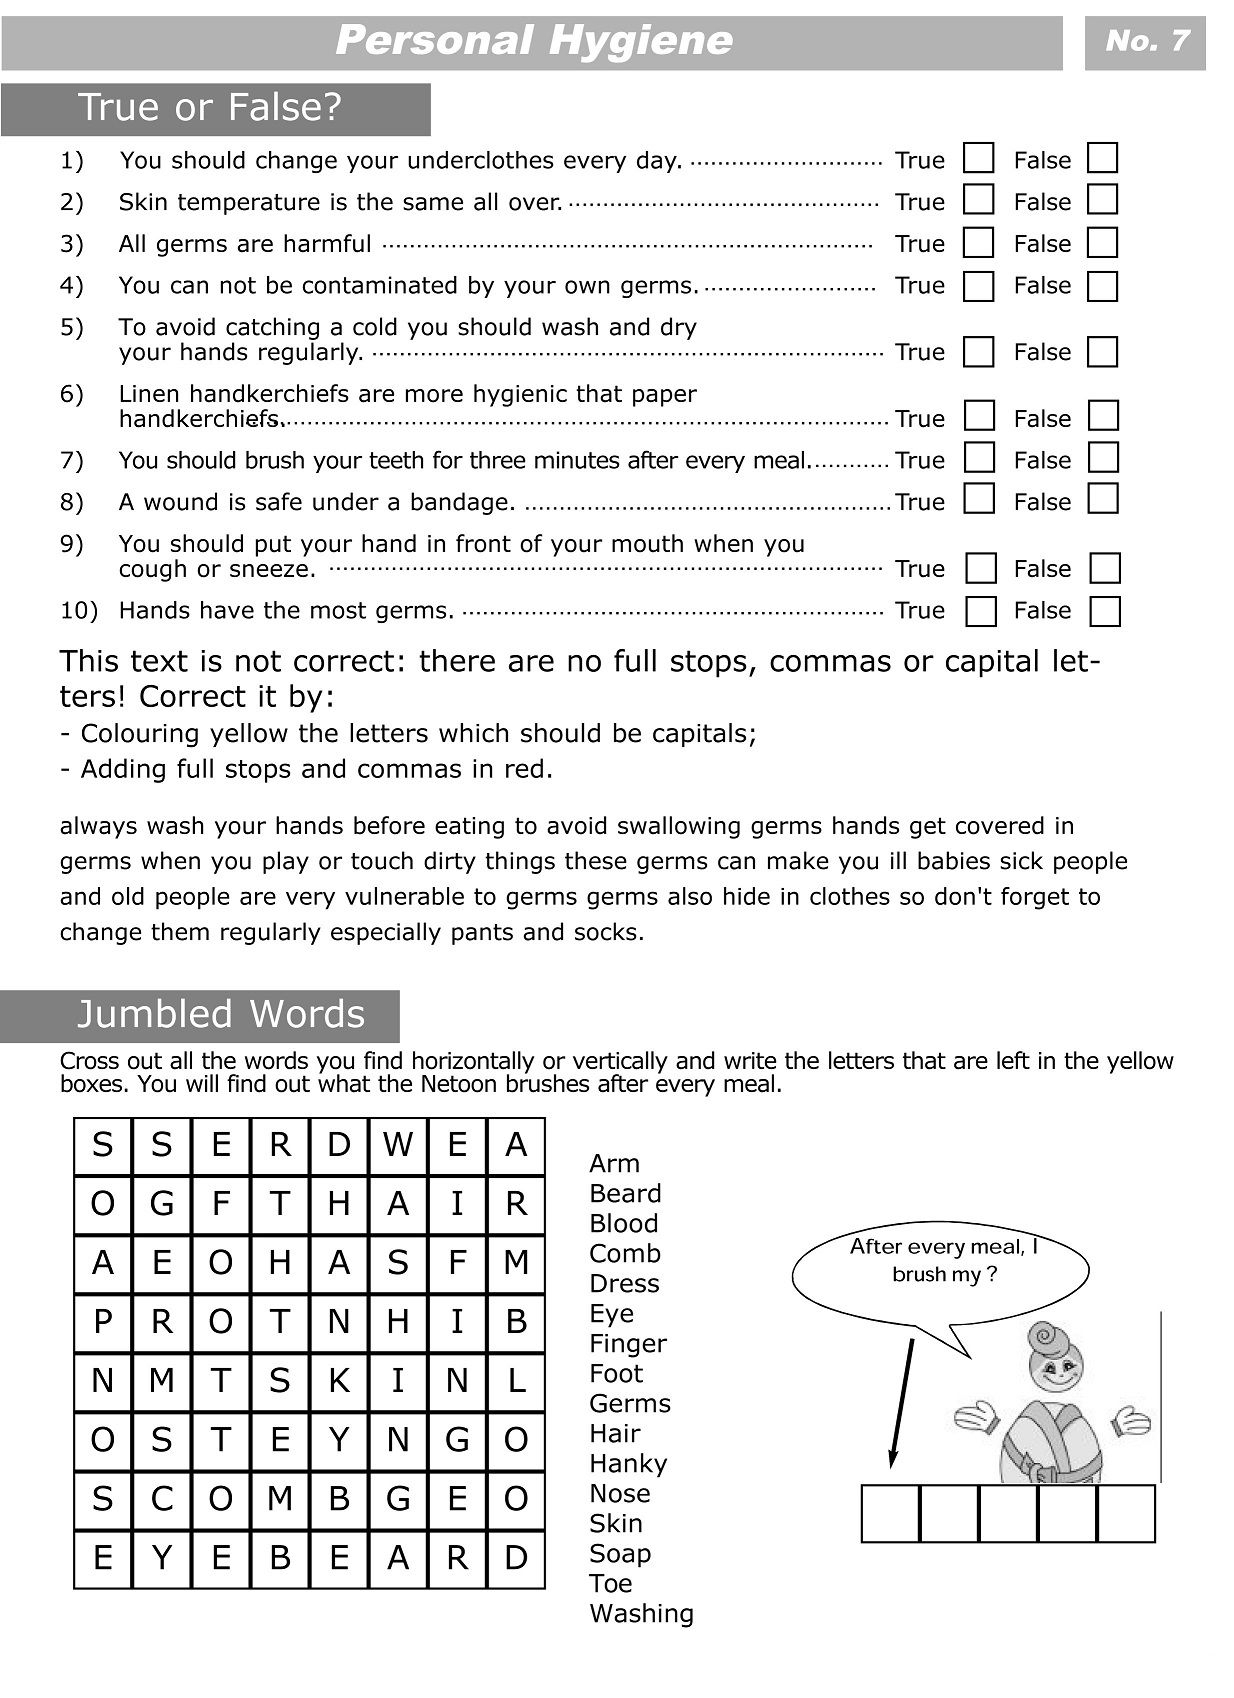 Printable Worksheets For Personal Hygiene | Personal Hygiene - Free Printable Life Skills Worksheets For Adults